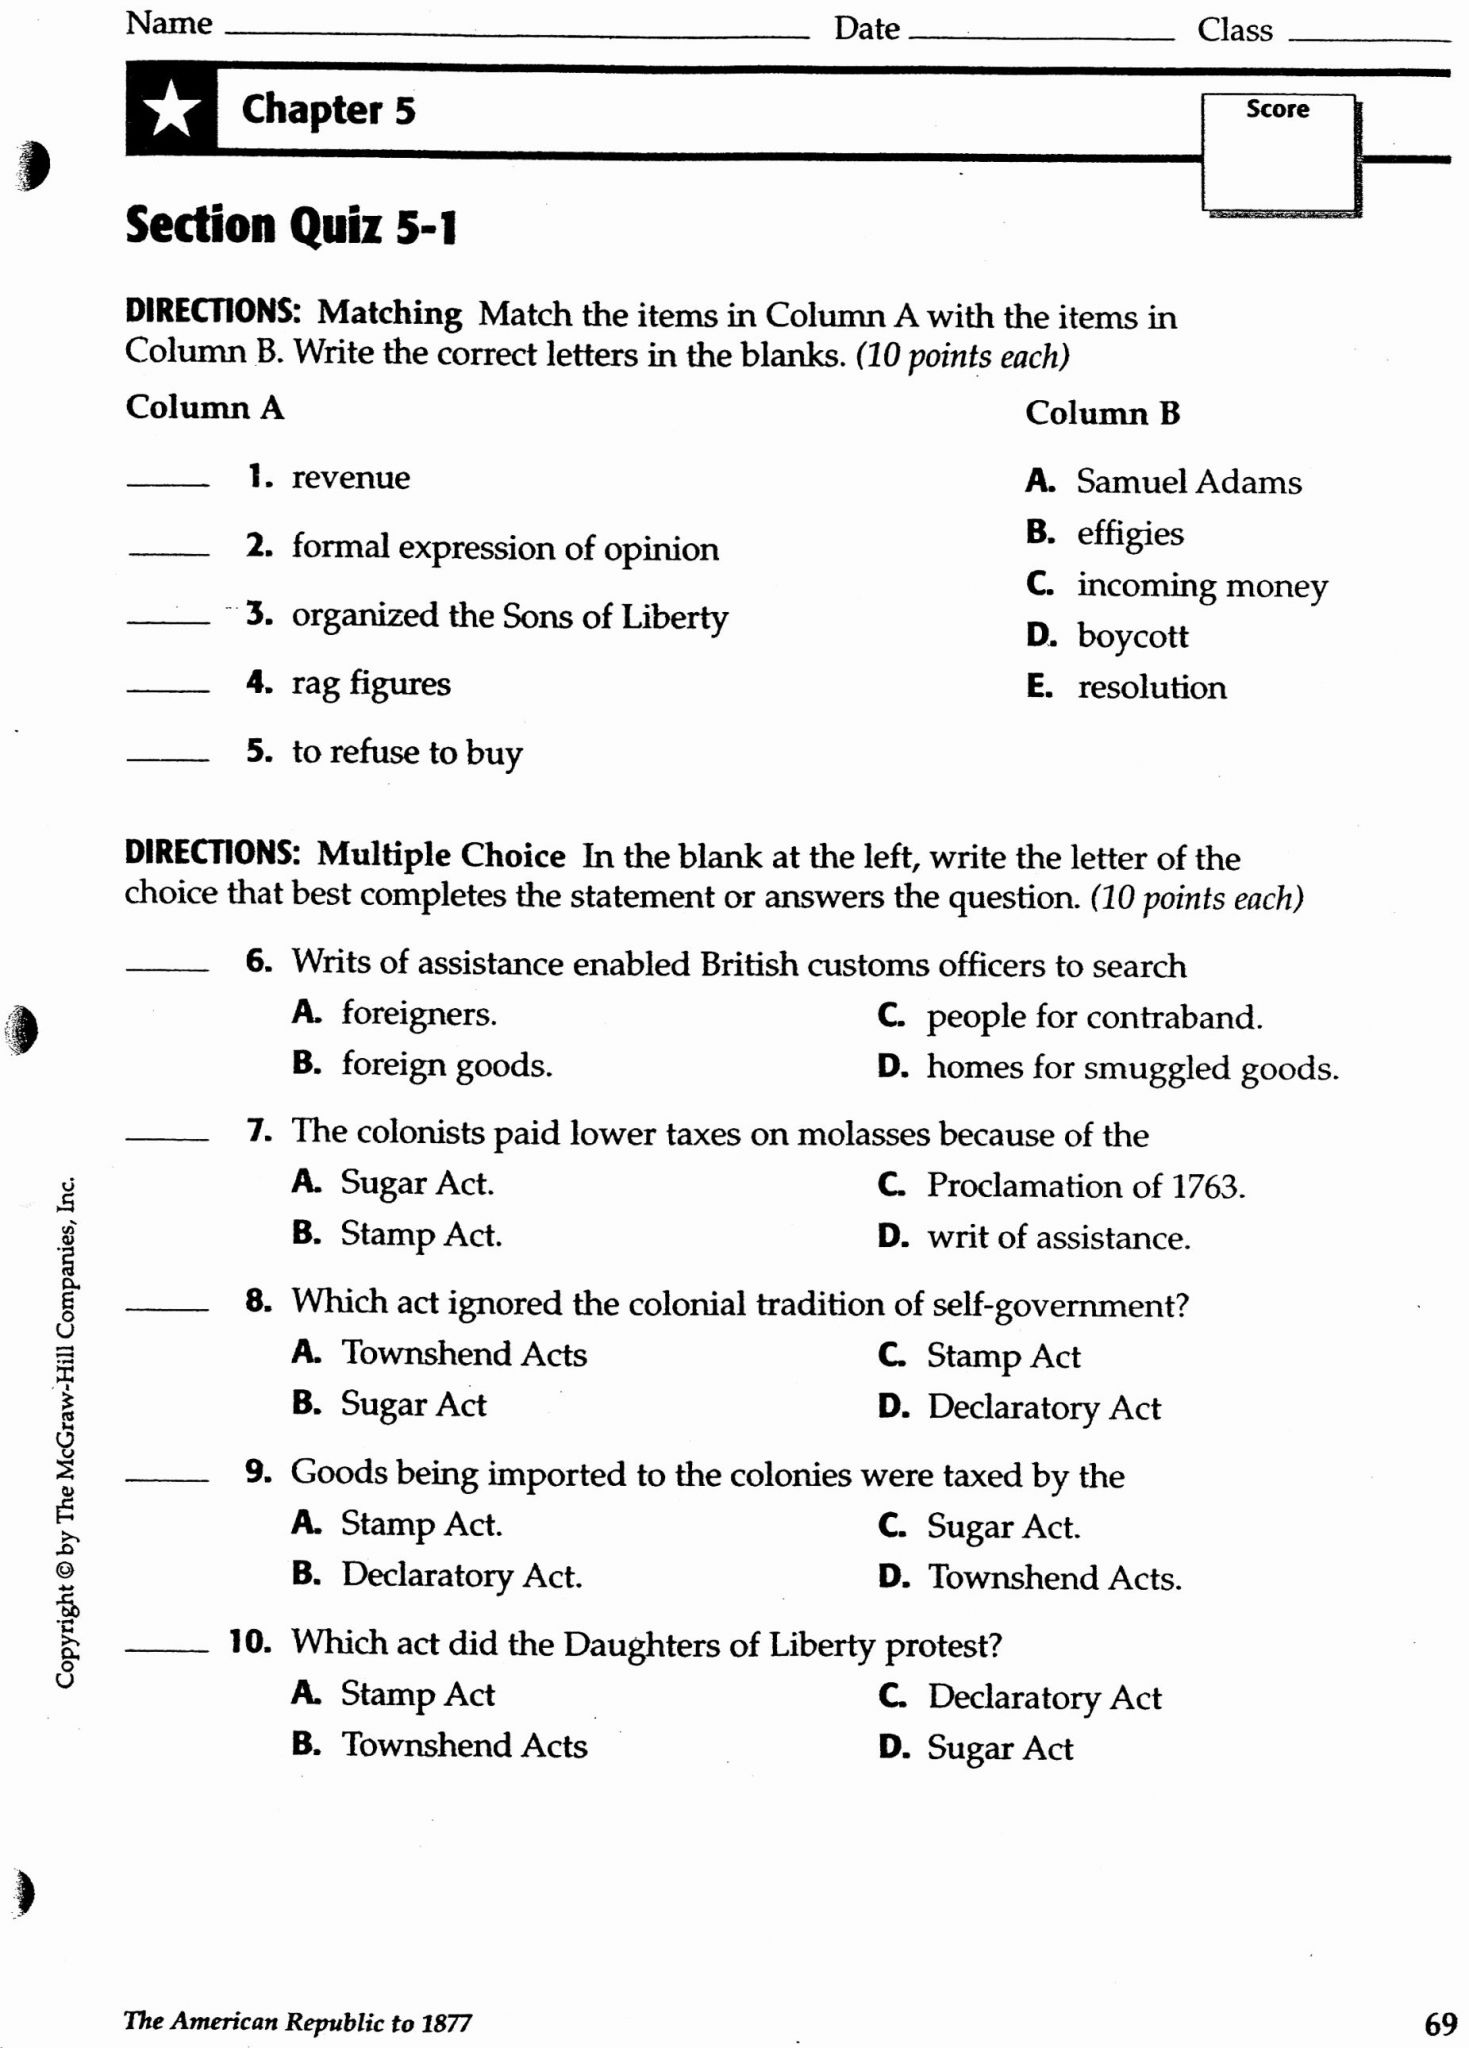 Anatomy Of The Constitution Icivics Worksheet Answers Anatomy Worksheets